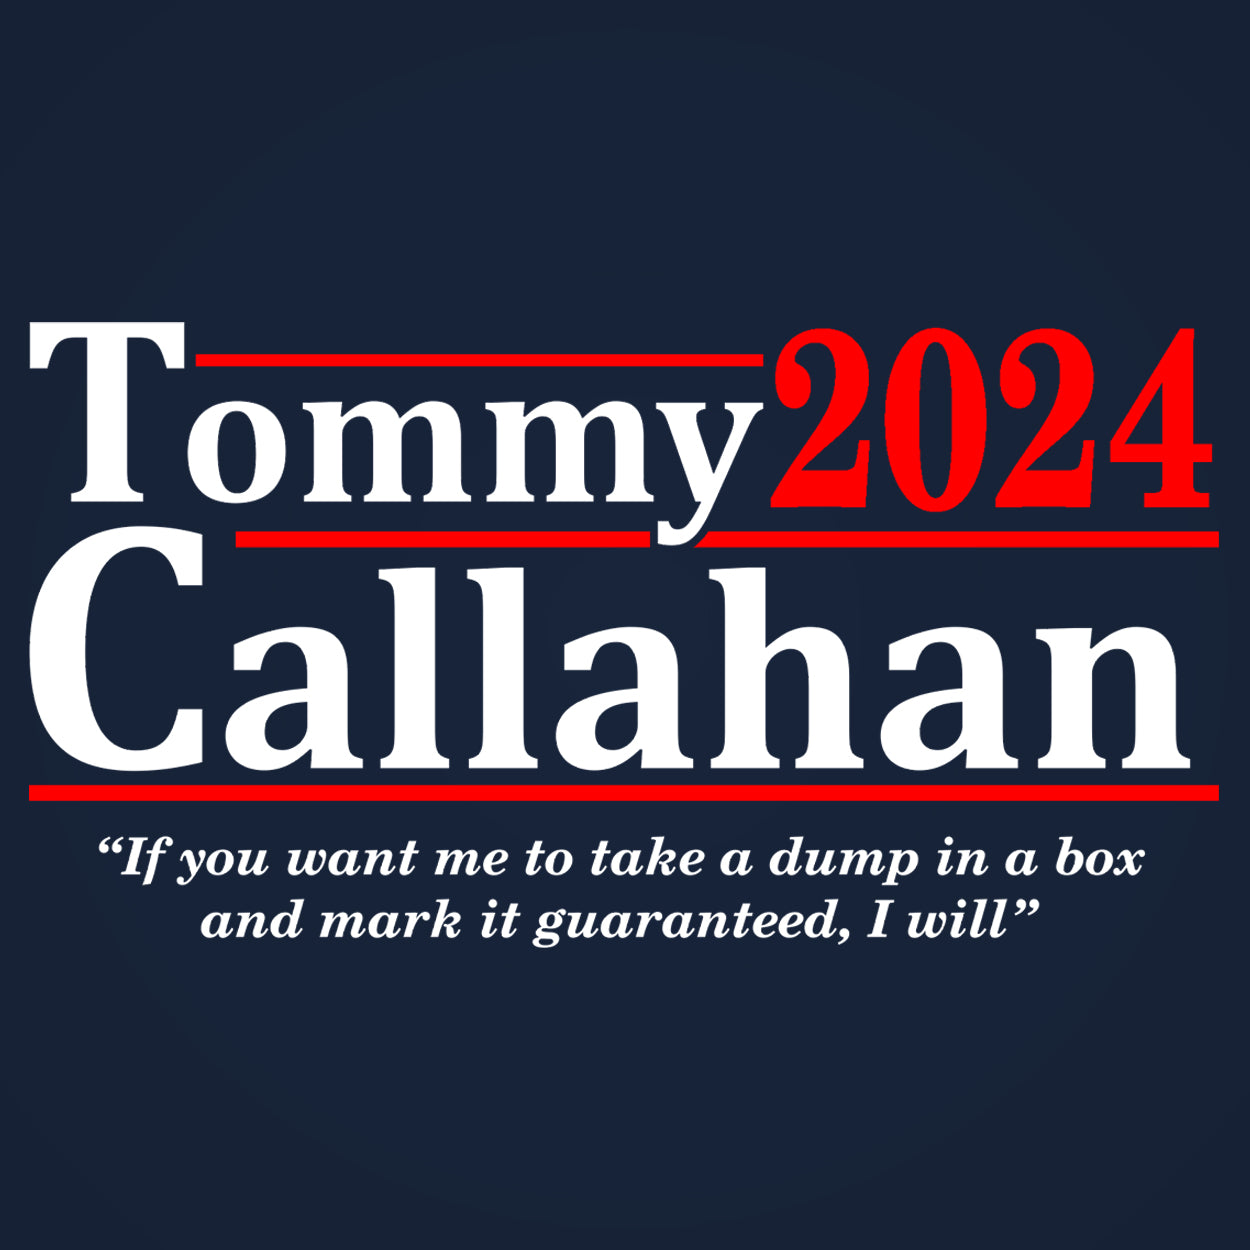 Tommy Callahan 2024 Election